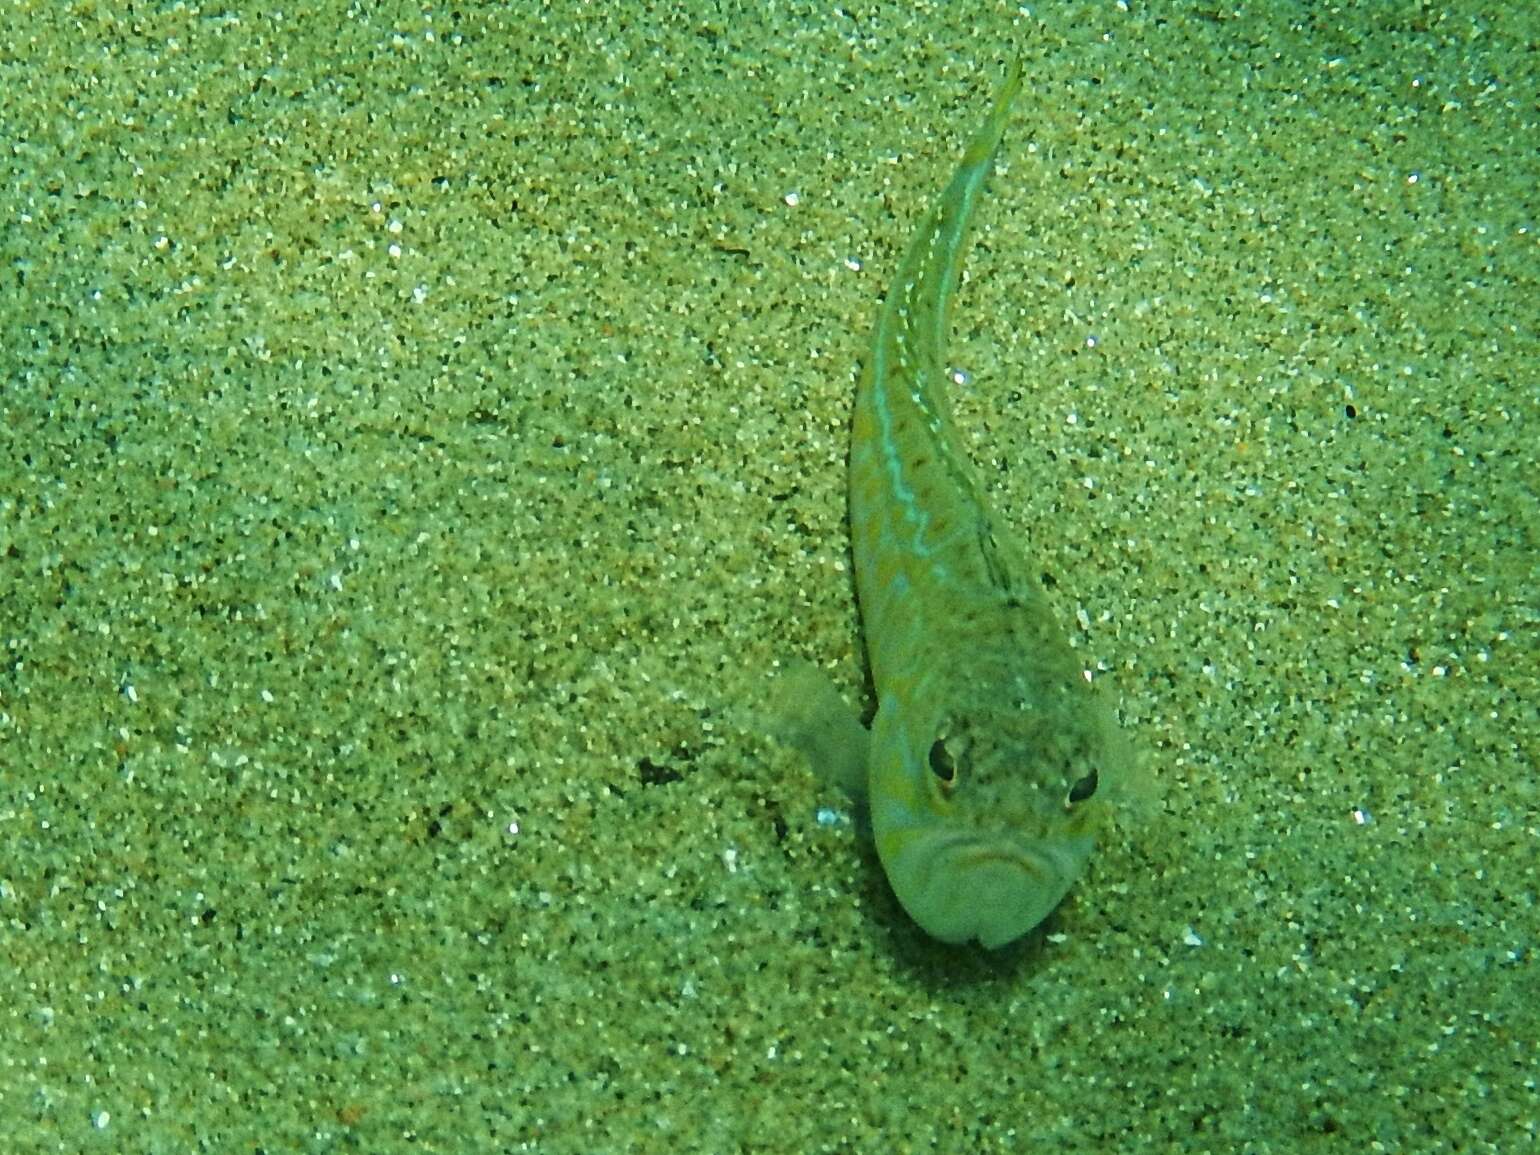 Image of weeverfishes